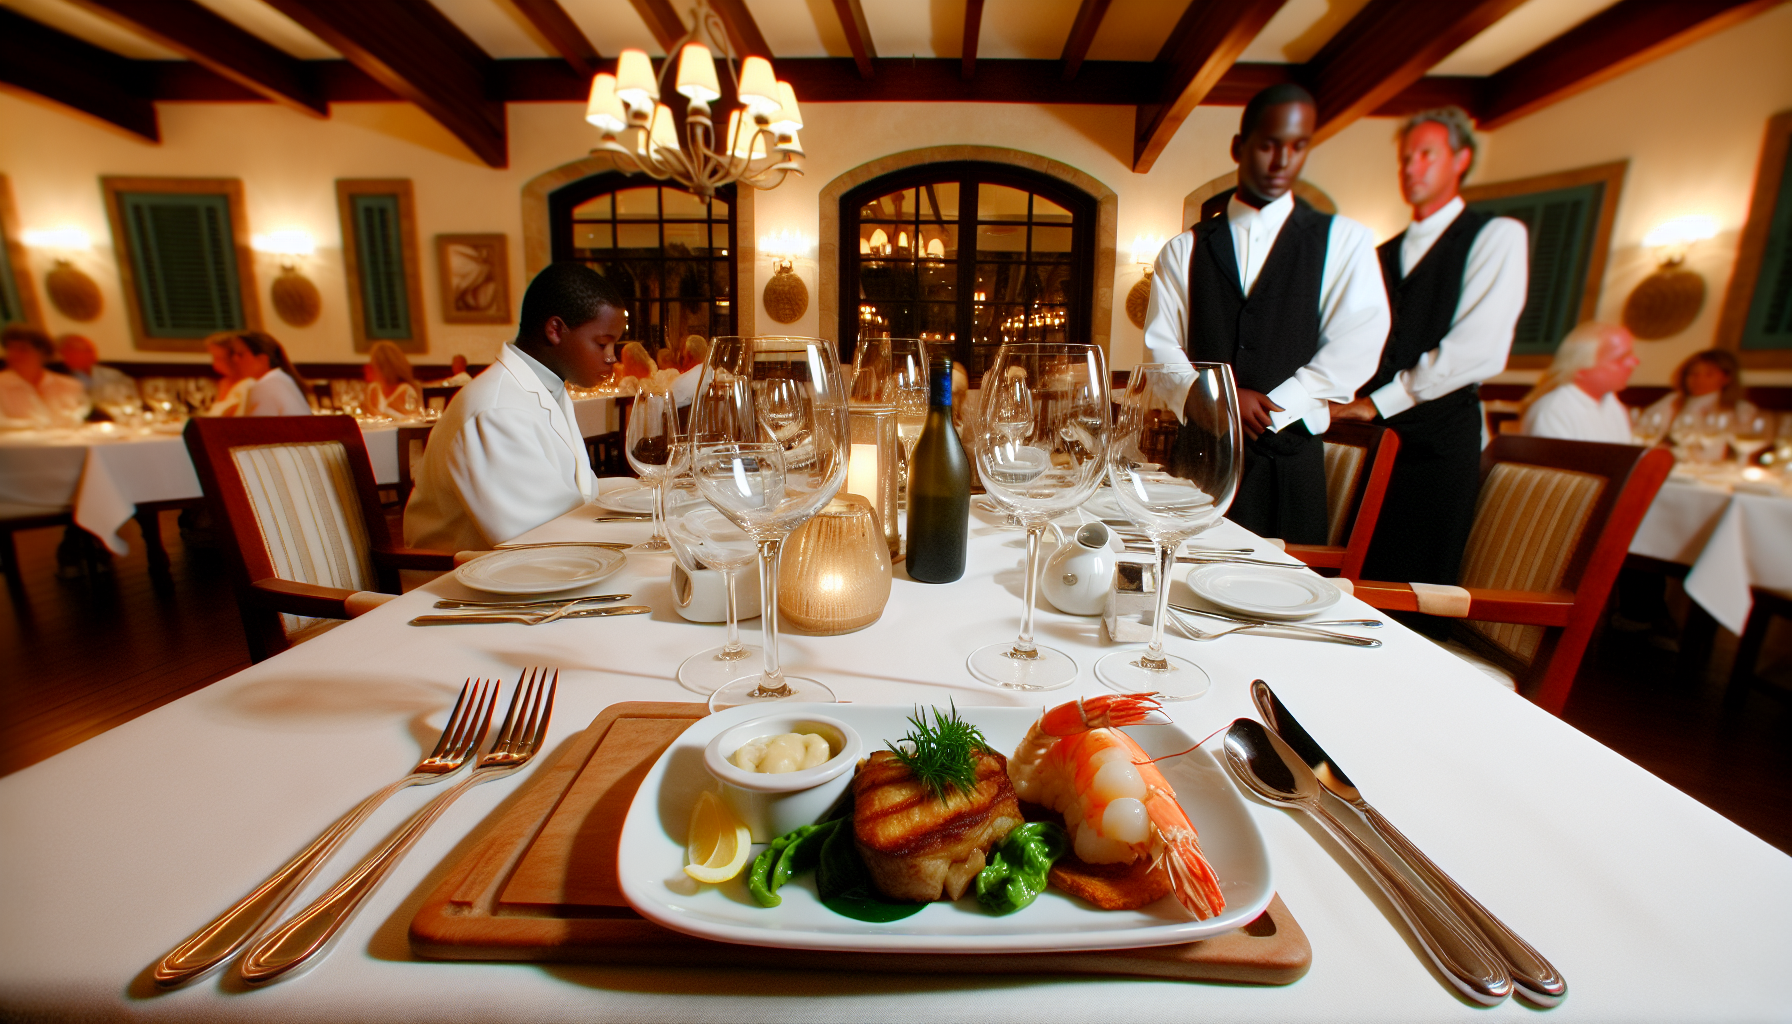 An elegant fine dining setting with a focus on seafood and steak in Destin